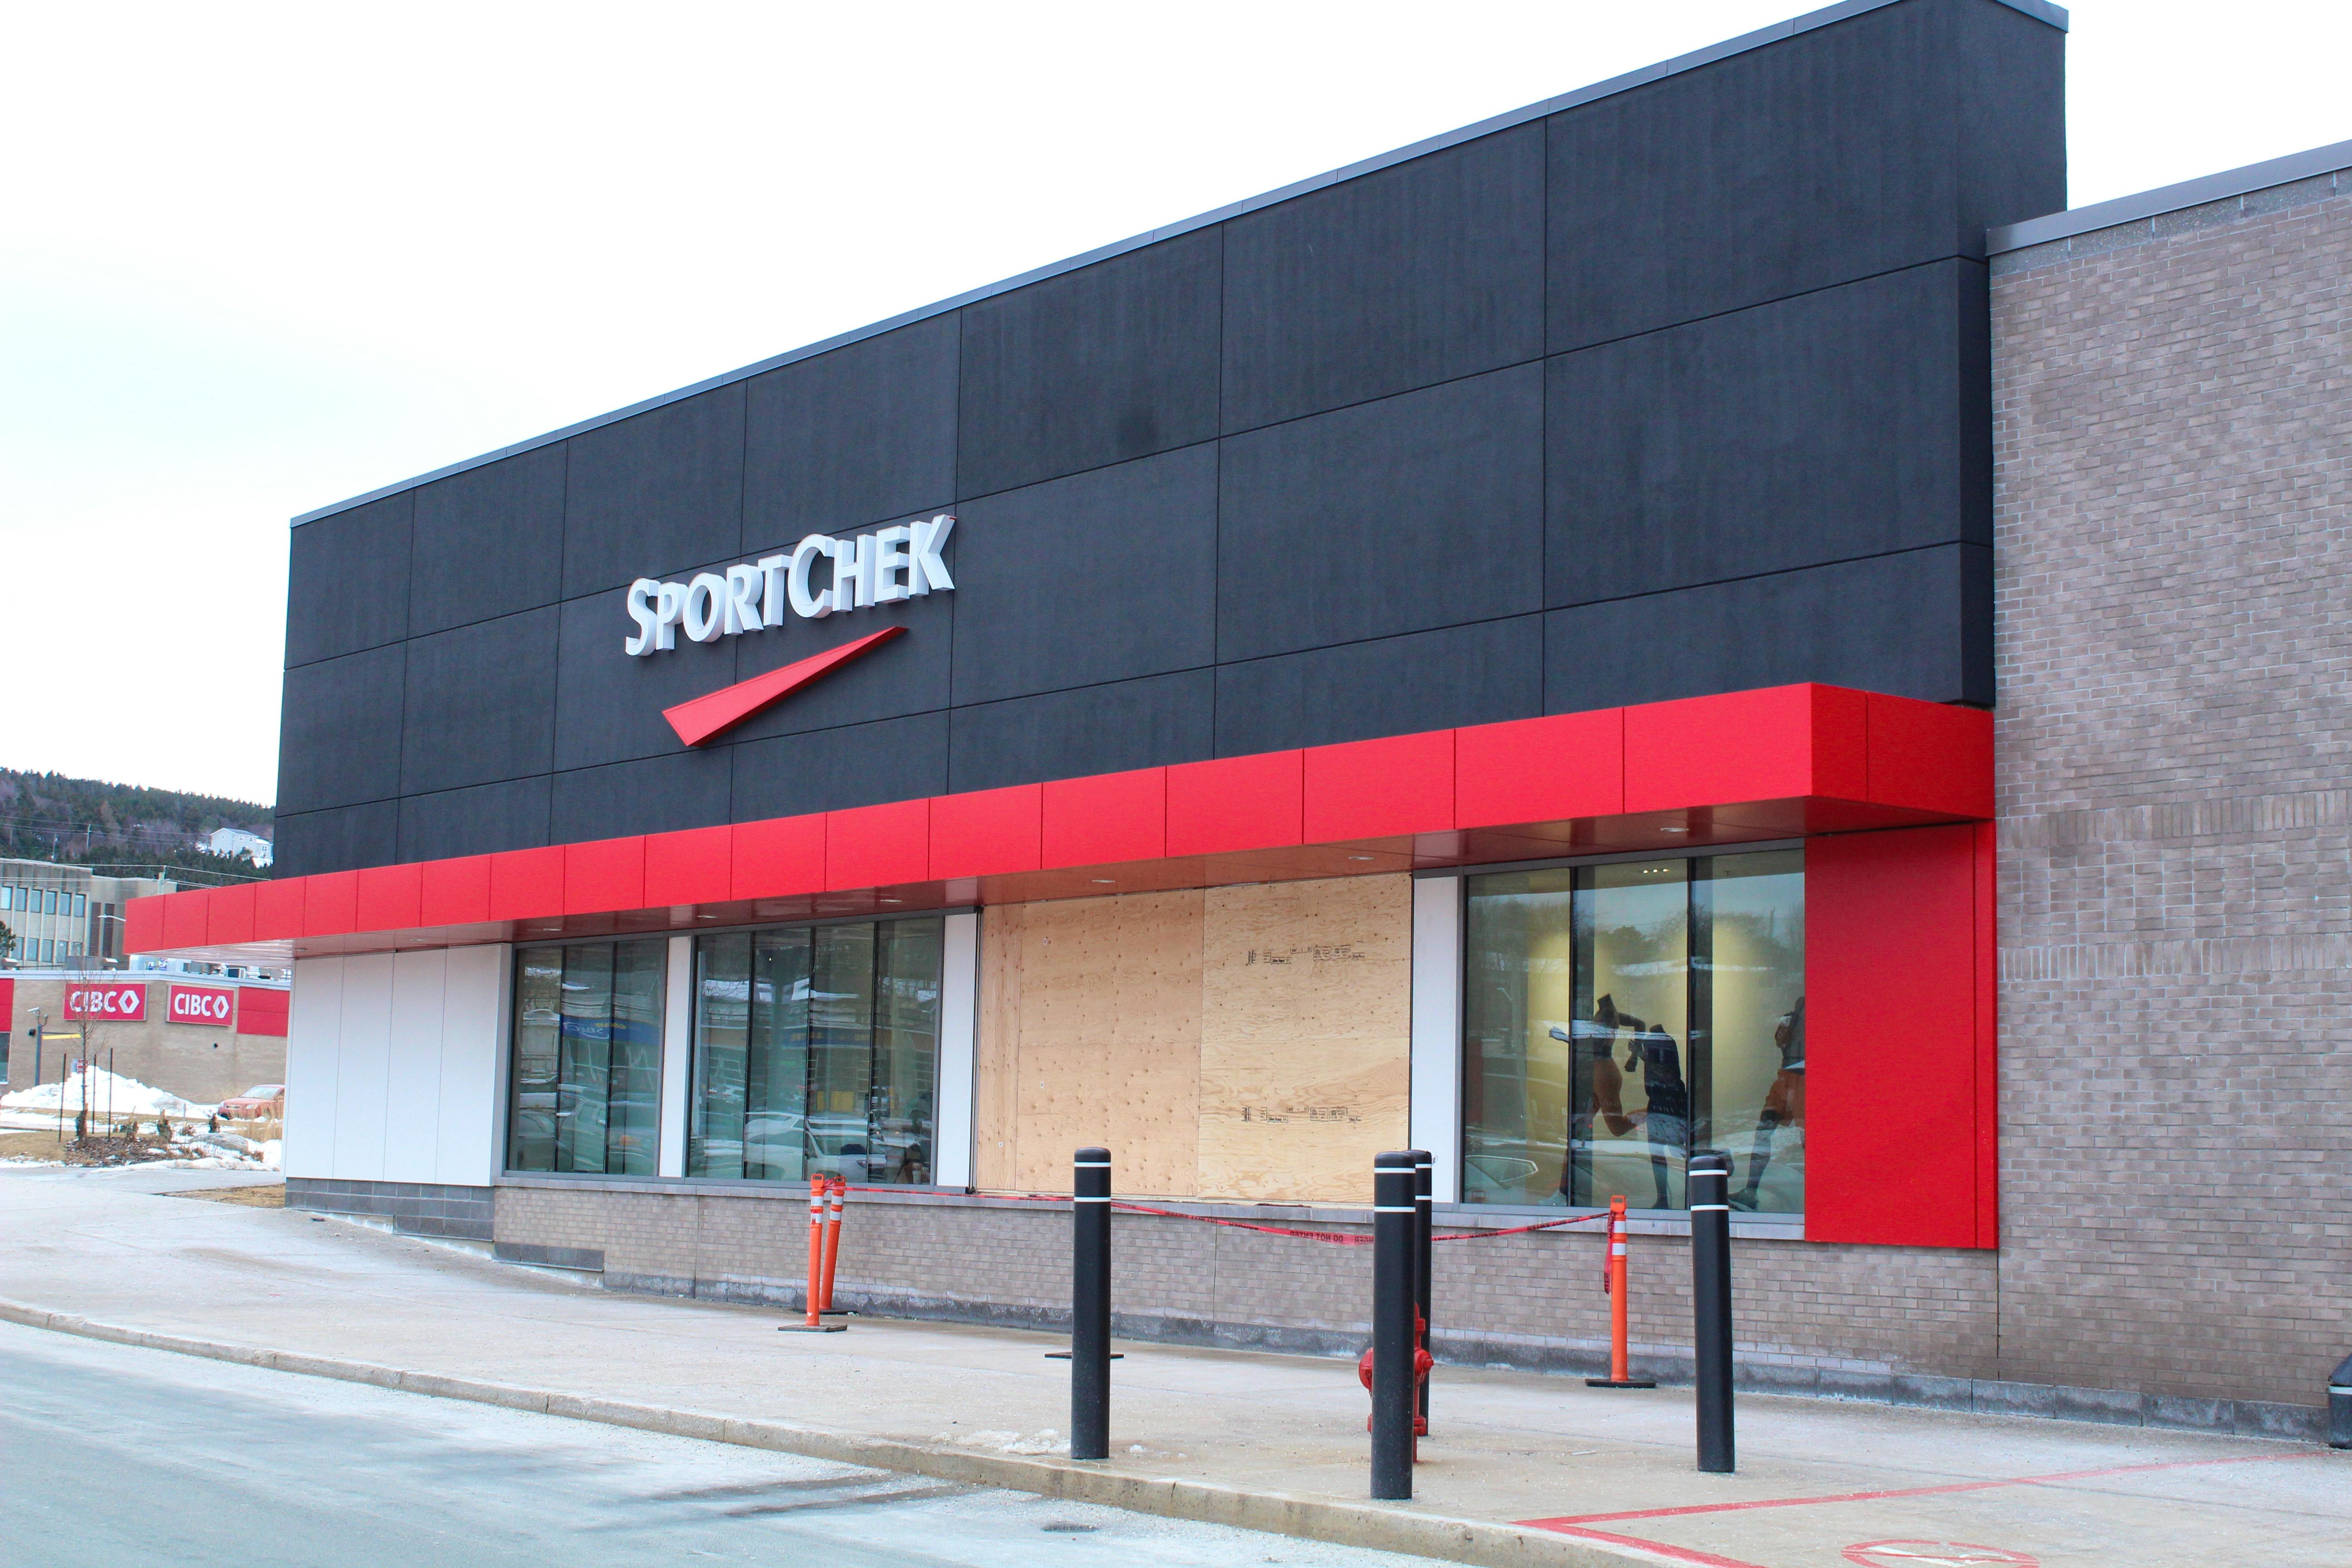 https://saltwire.imgix.net/2024/1/3/rnc-says-investigation-of-break-in-at-sport-chek-in-avalon-ma_oiCAkg3.jpg?cs=srgb&auto=format%2Cenhance%2Ccompress